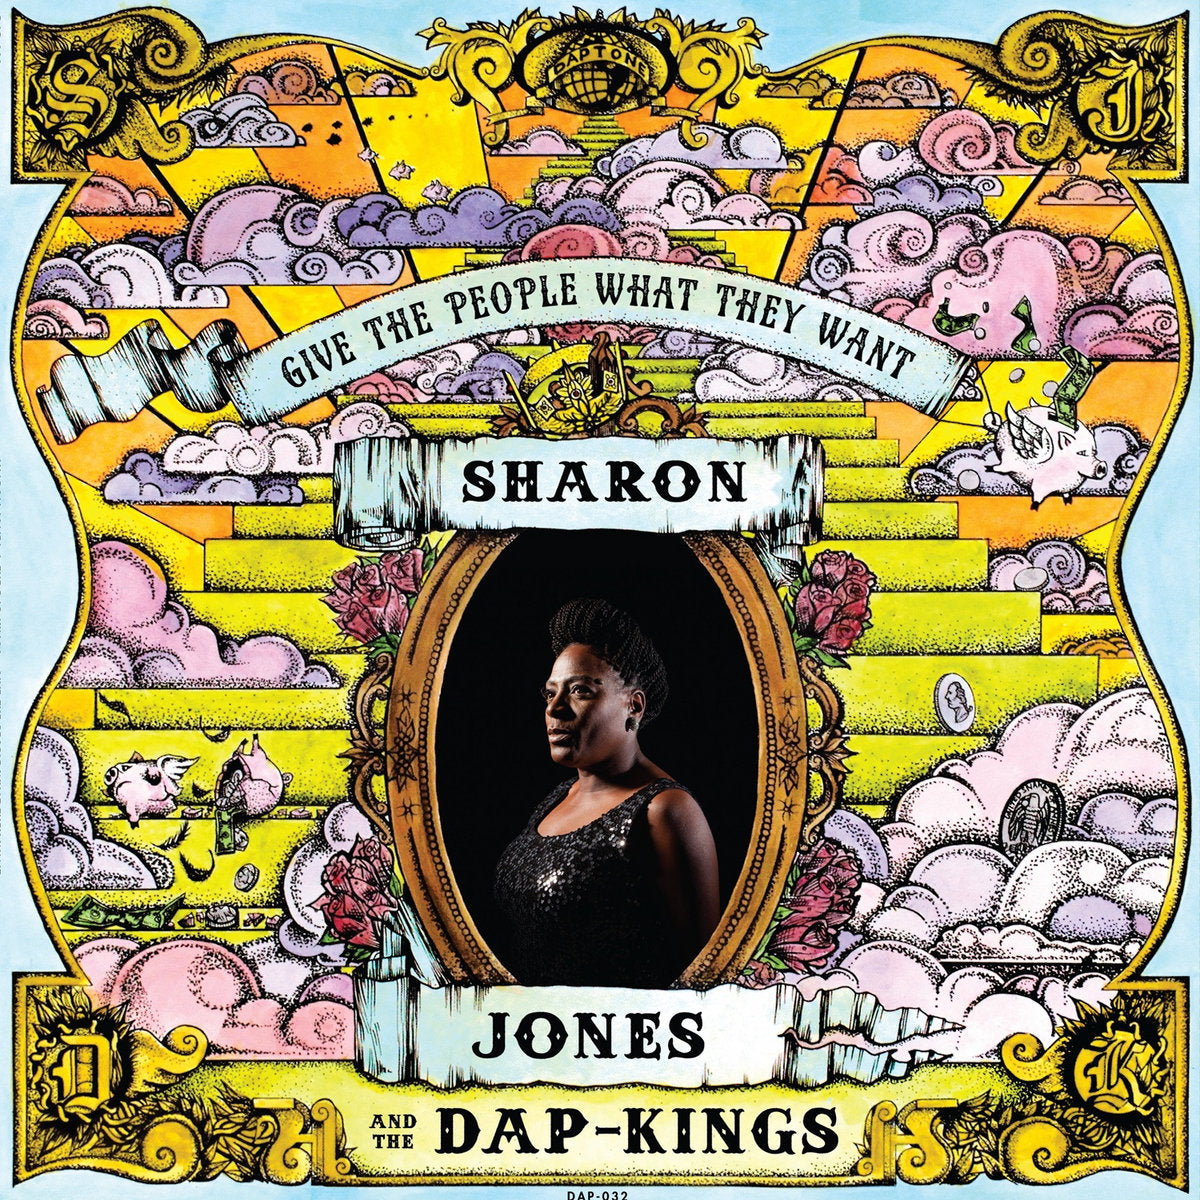 Sharon Jones & the Dap-Kings - Give the People What They Want LP